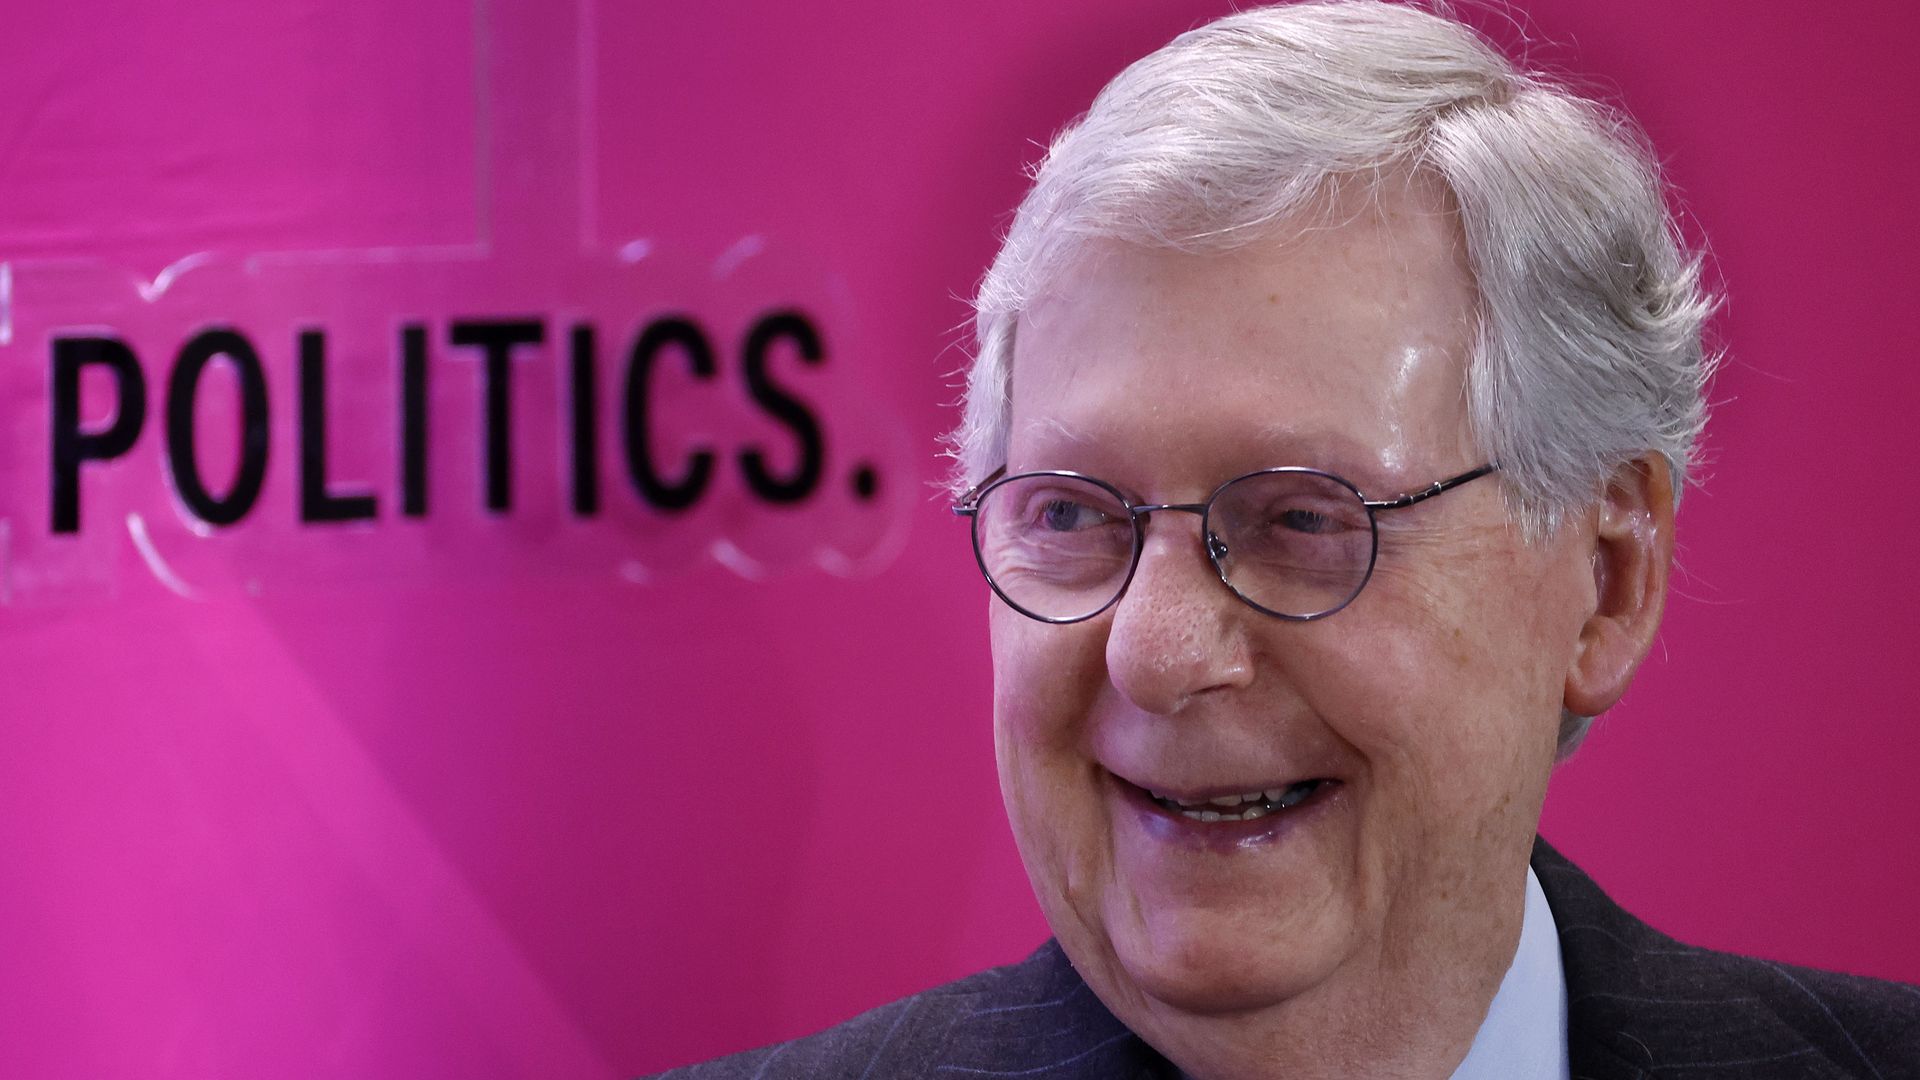 Mitch McConnell smiles during an onstage interview